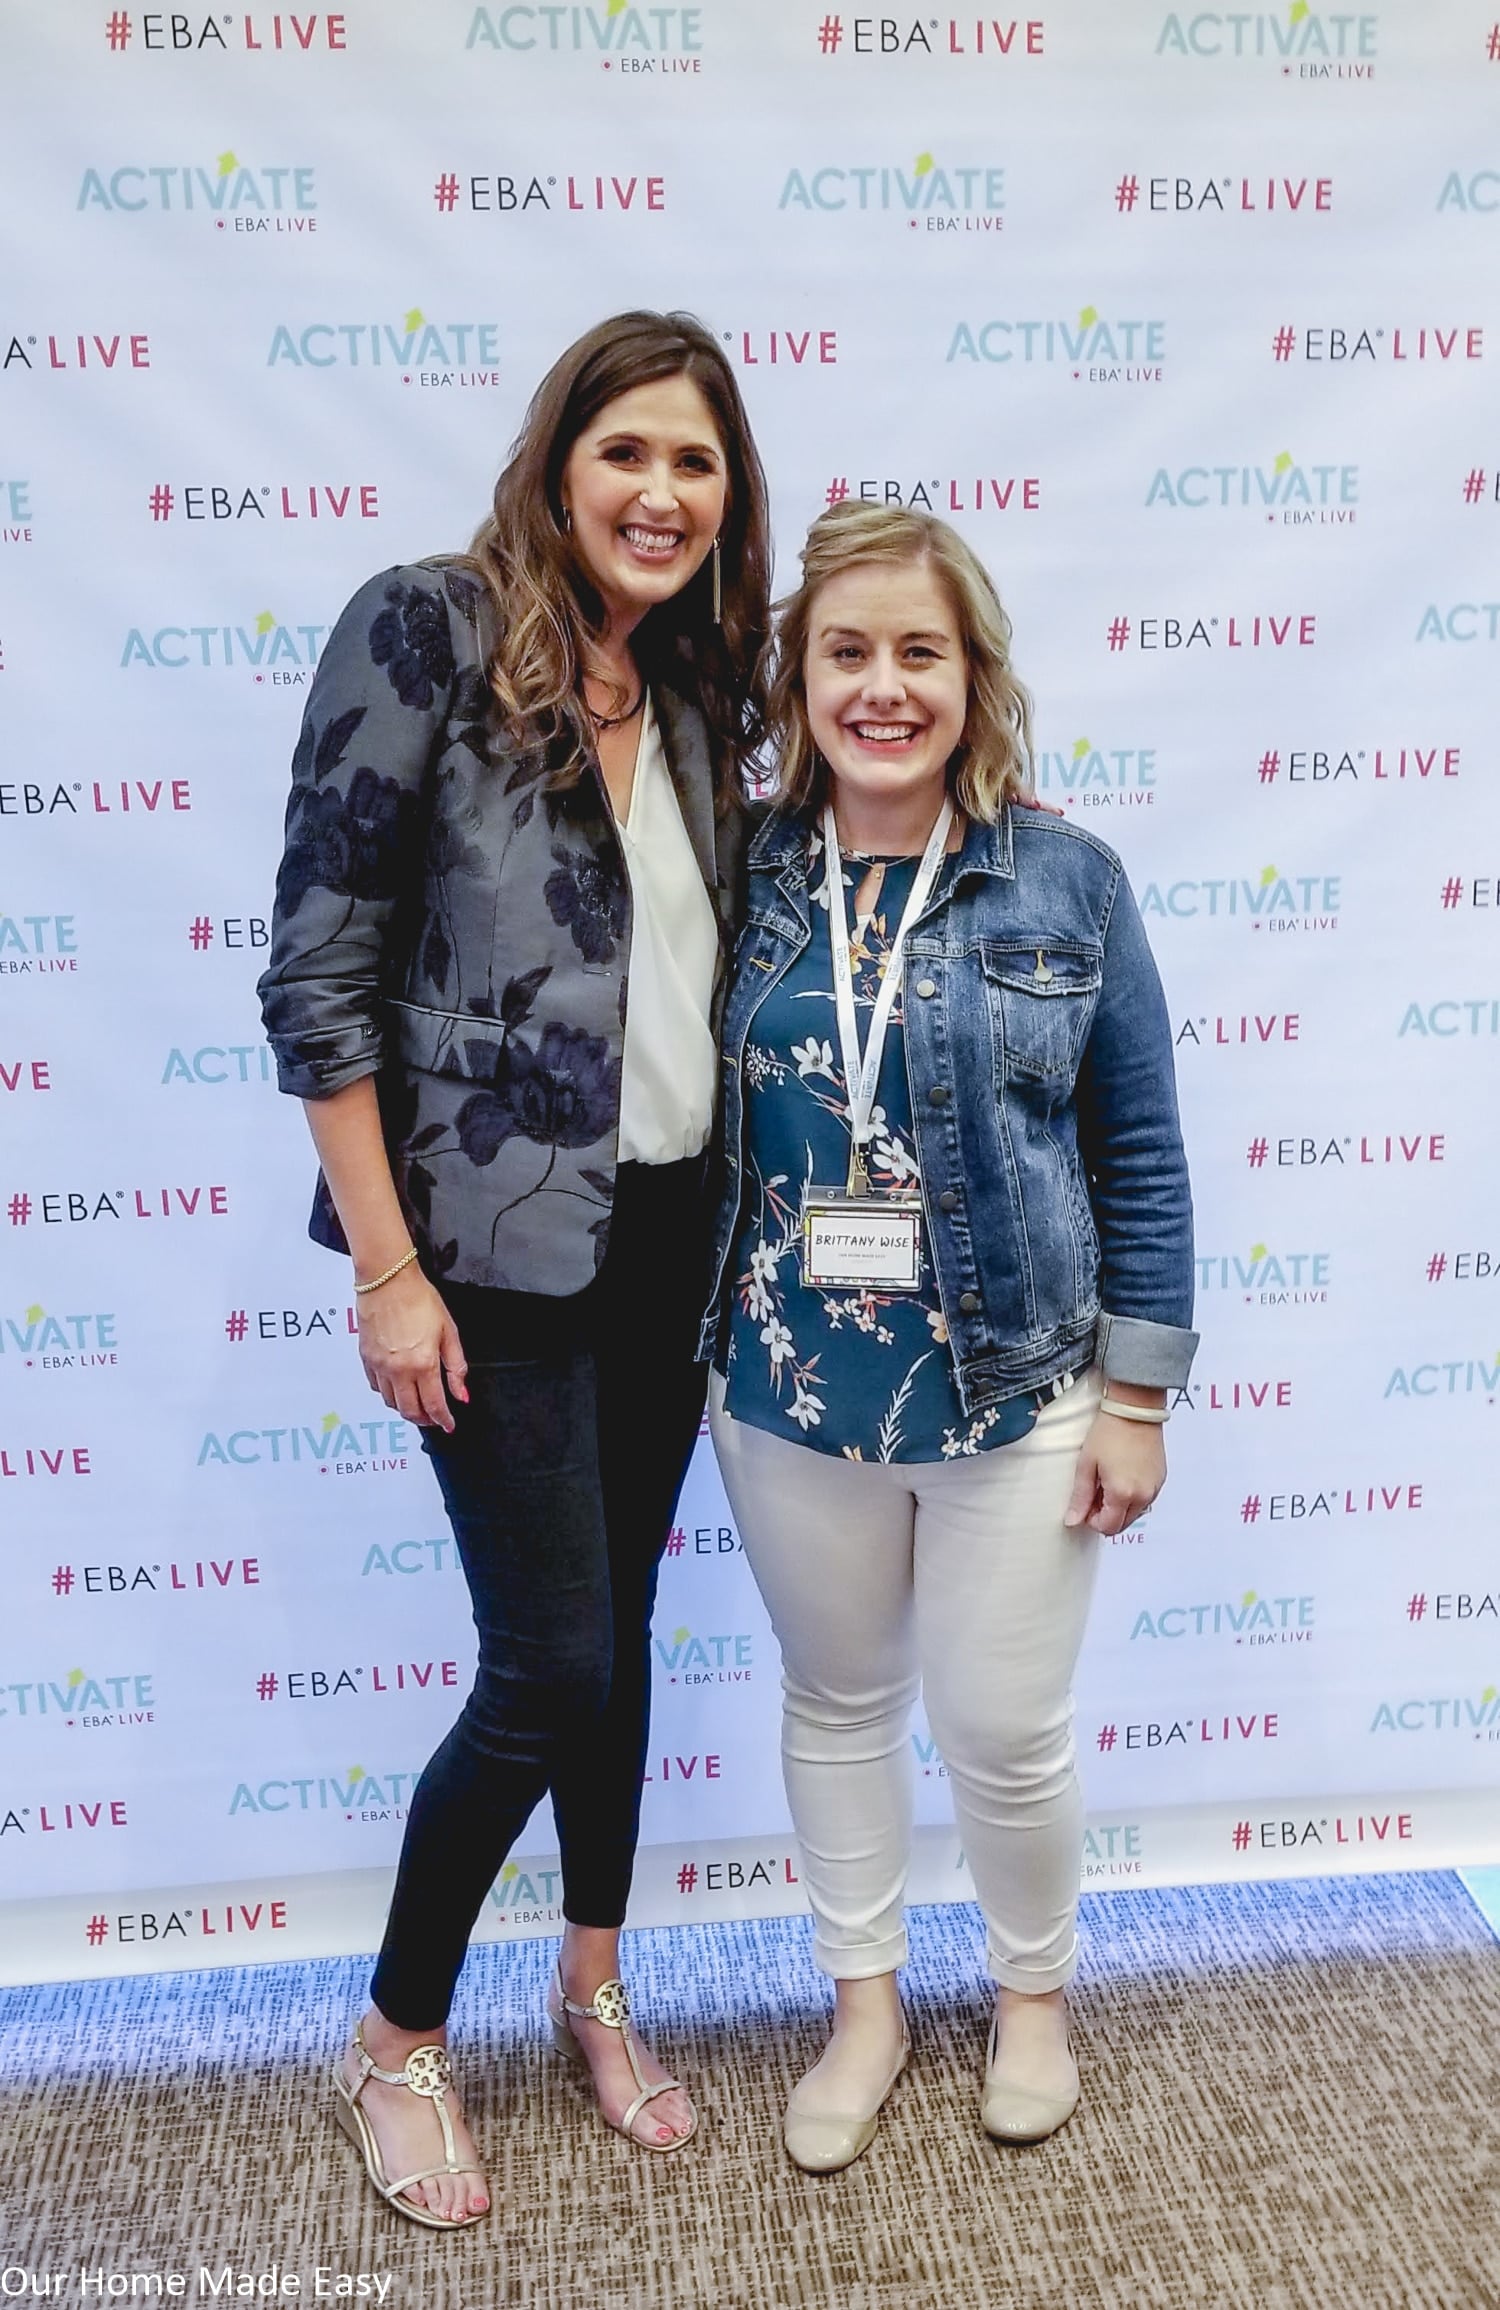 Brittany with Ruth Soukup, founder of Activate EBA Life